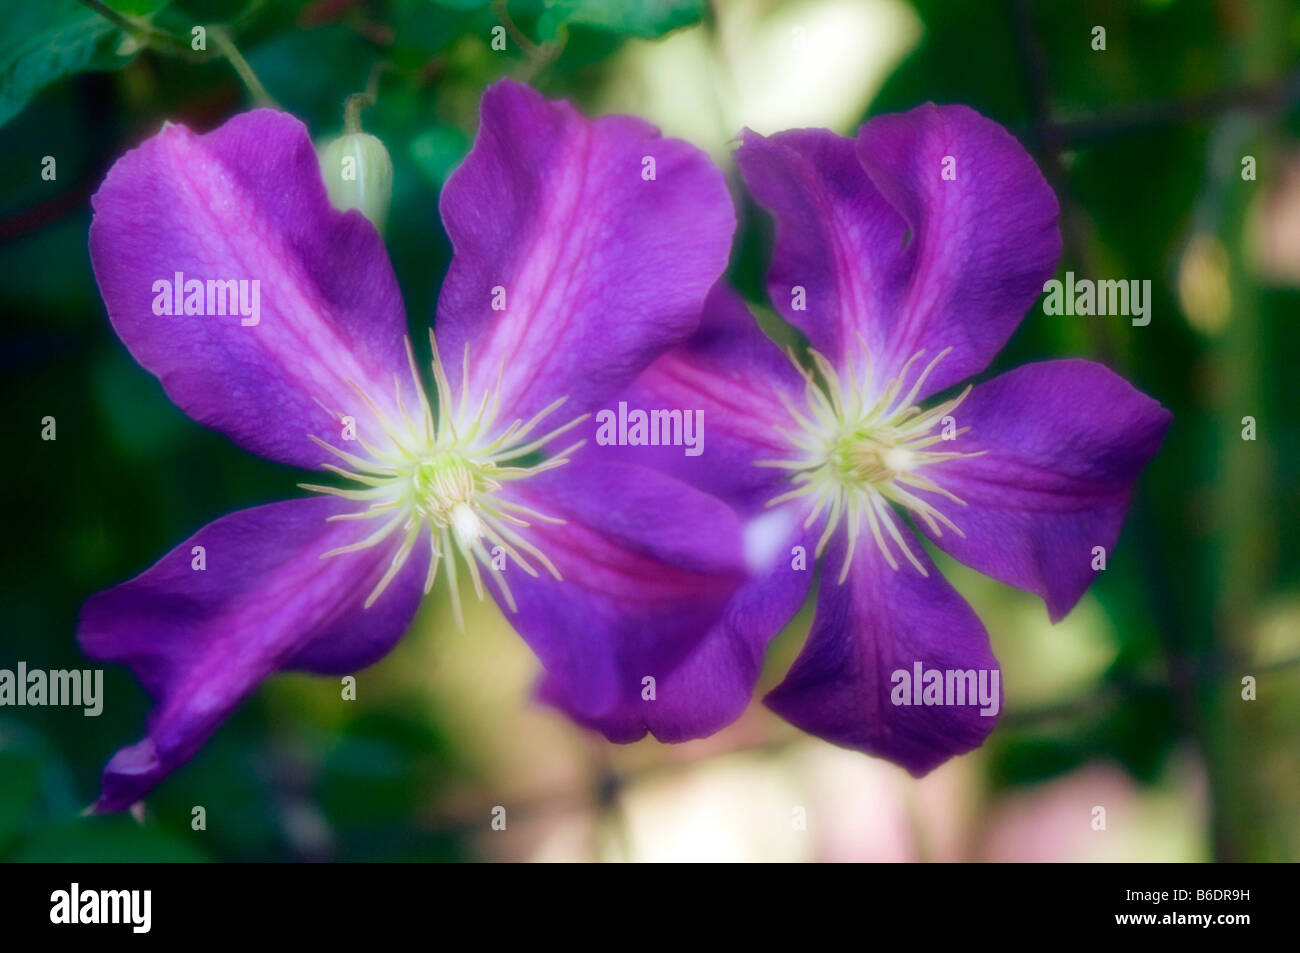 Clematis flower, close up Stock Photo